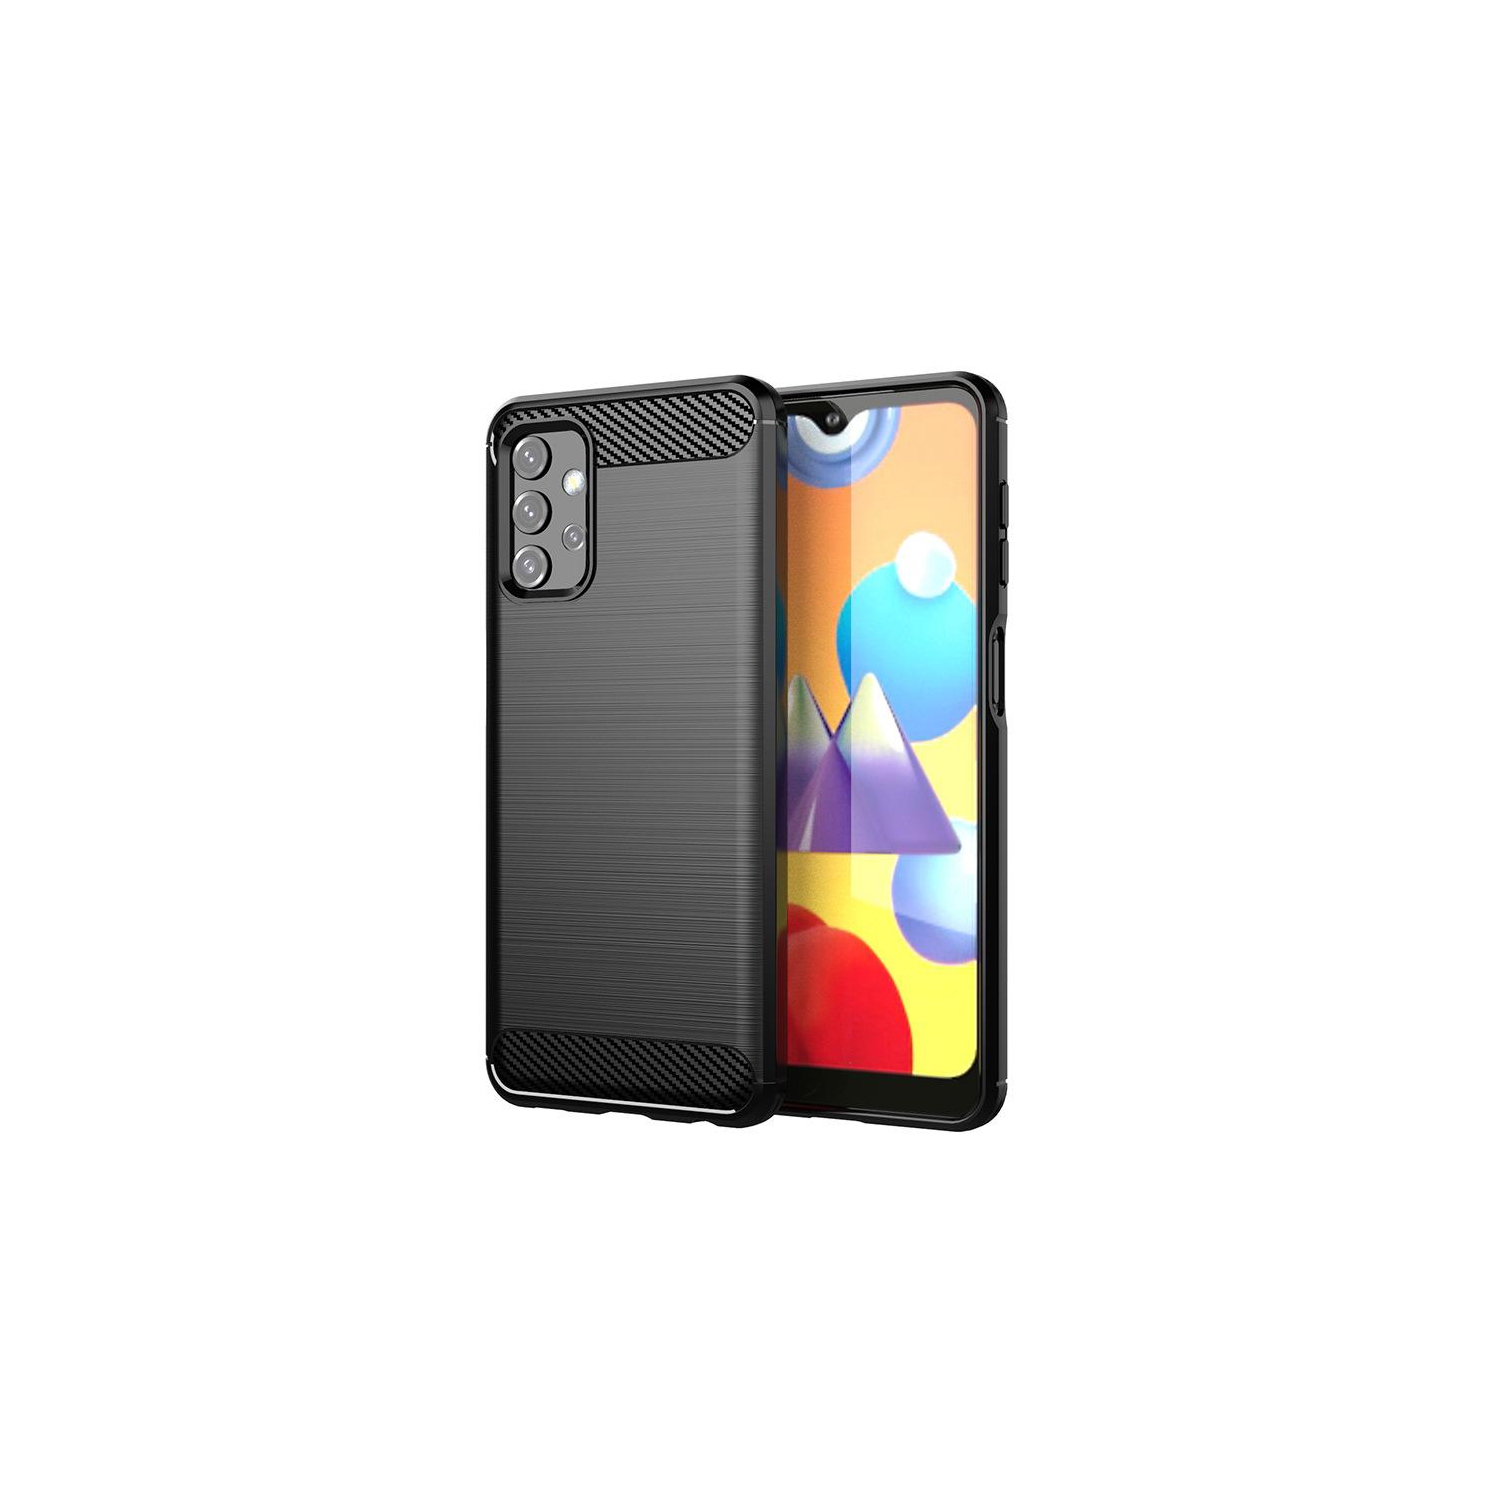 PANDACO Black Brushed Metal Case for Samsung Galaxy A32 5G